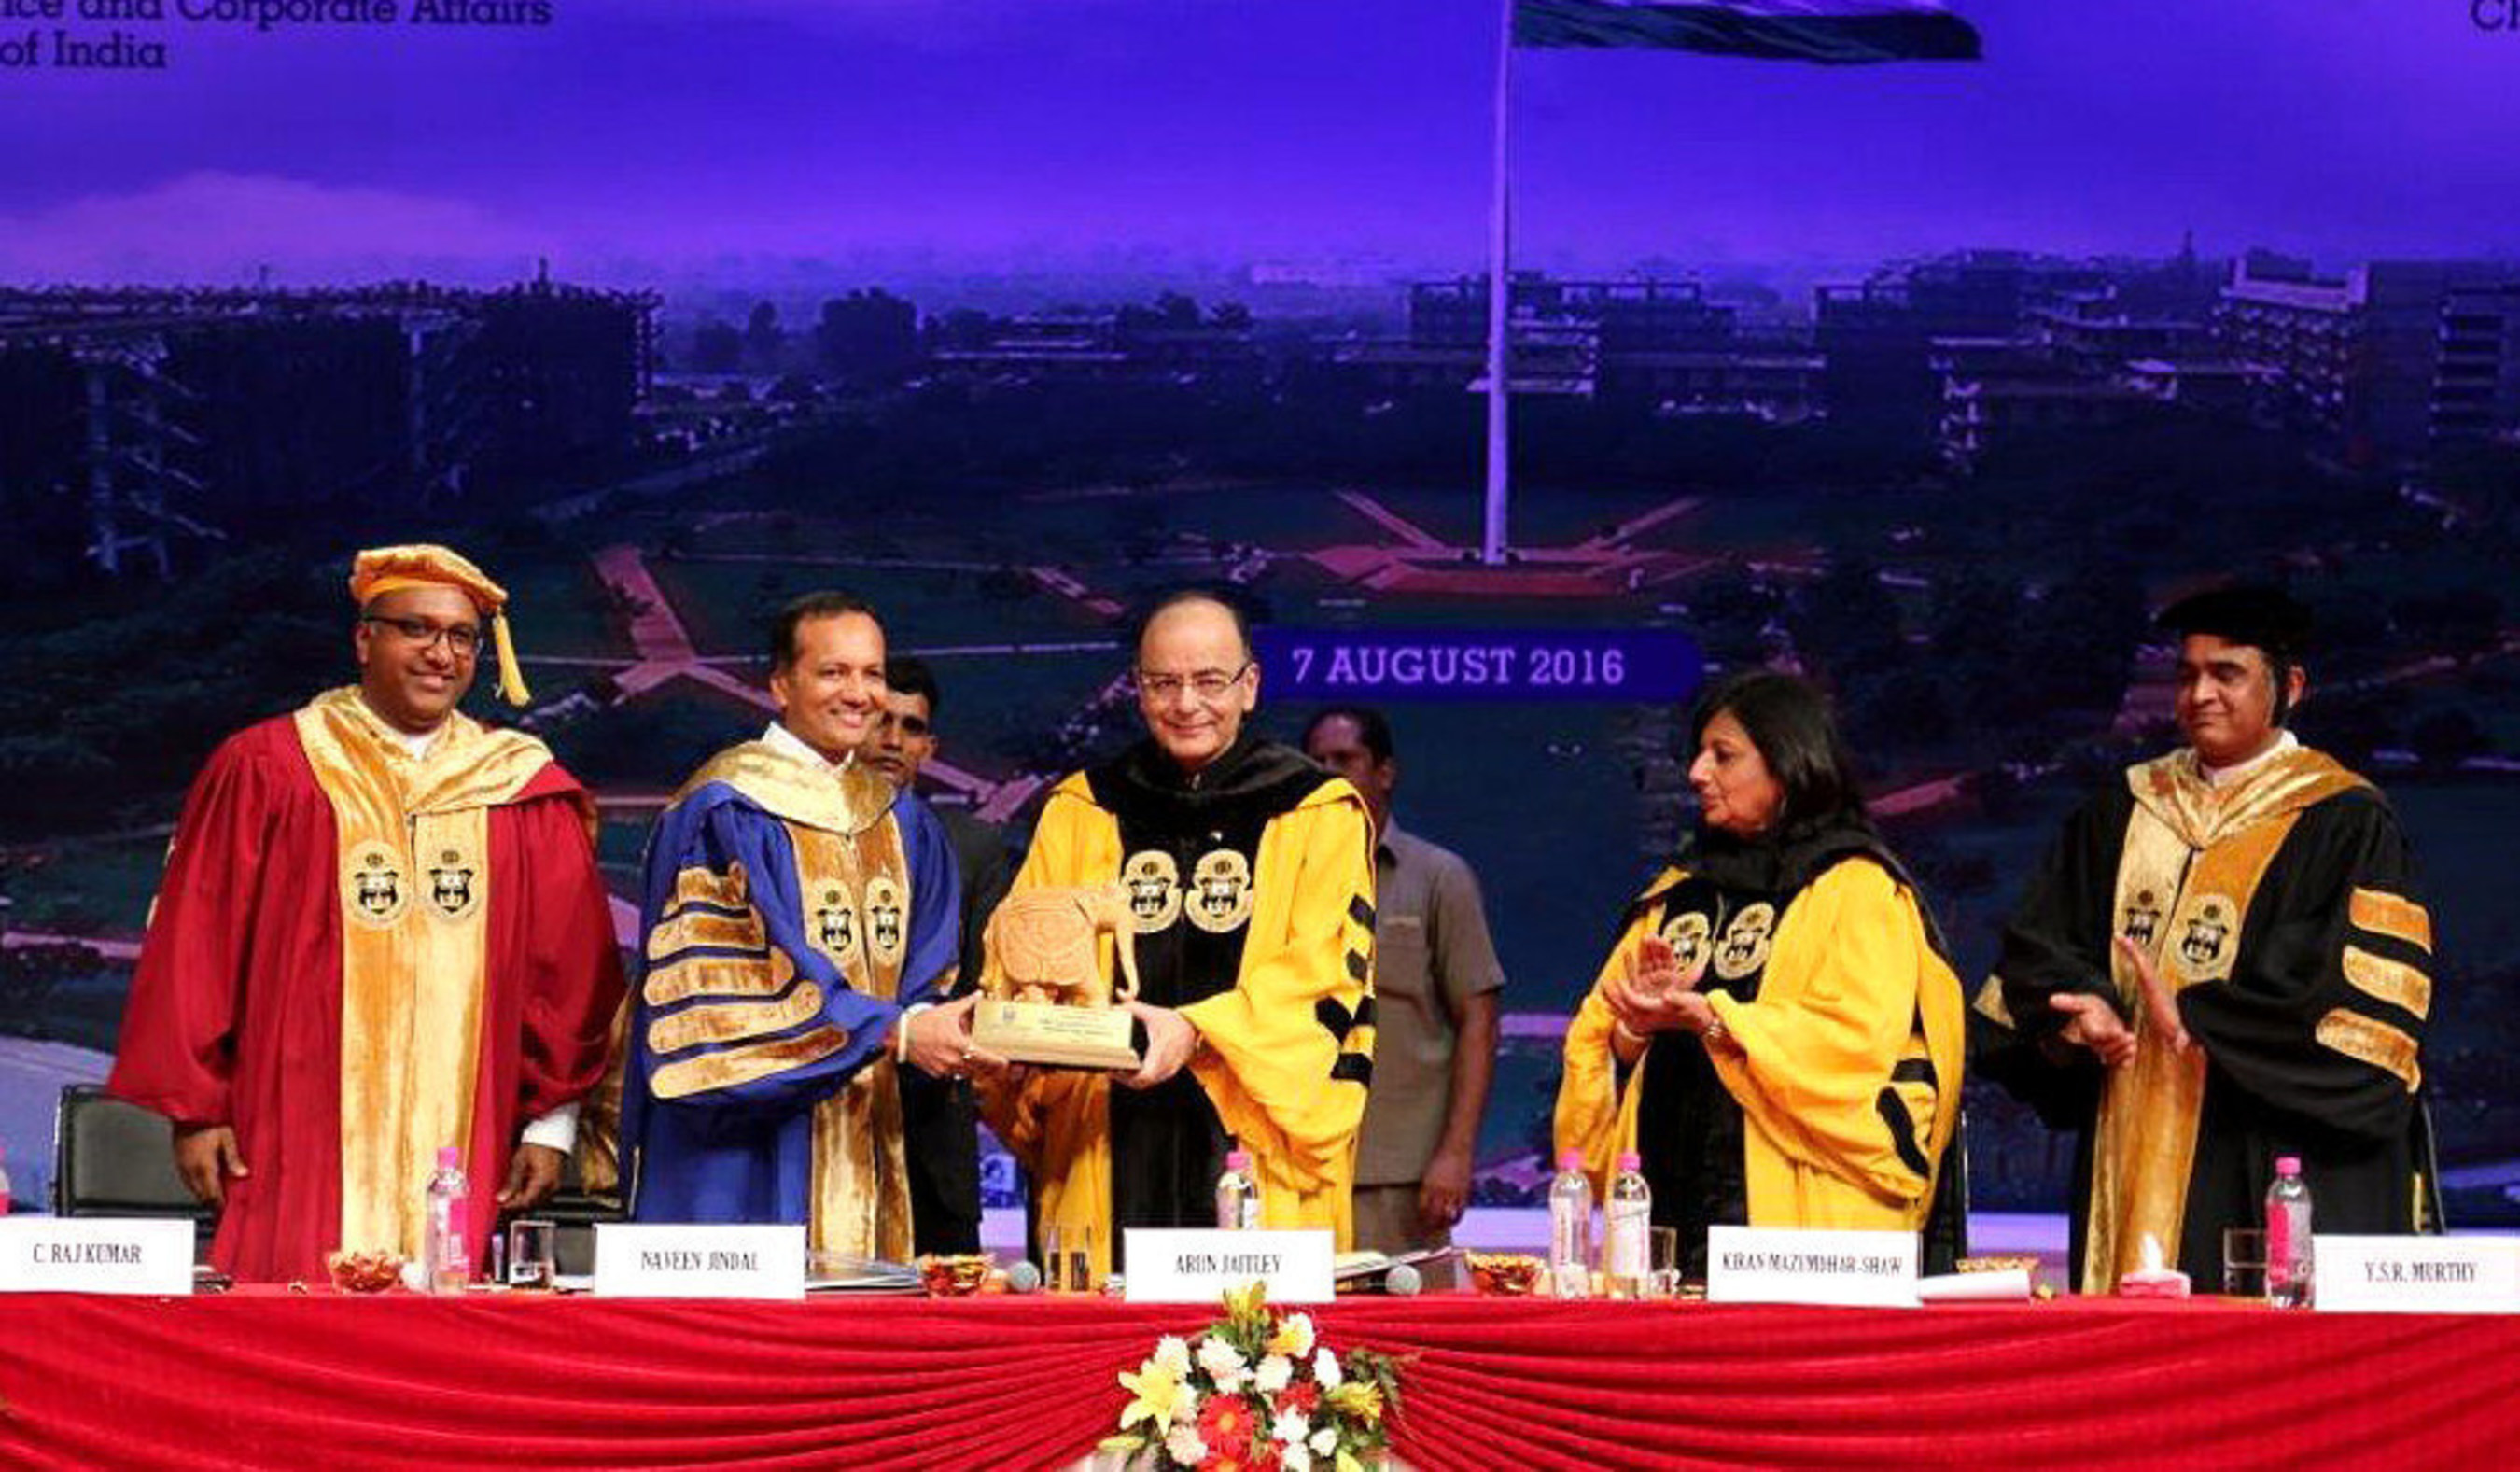 JGU Chancellor, Mr. Naveen Jindal presenting a token of appreciation to Shri Arun Jaitley, Hon'ble Union Minister of Finance and Corporate Affairs in the presence of Ms. Kiran Mazumdar-Shaw, Chairperson and Managing Director, Biocon Limited and JGU Vice-Chancellor, Prof (Dr.) C Raj Kumar and Registrar Prof (Dr.) Y.S.R Murthy (PRNewsFoto/O.P. Jindal Global University)